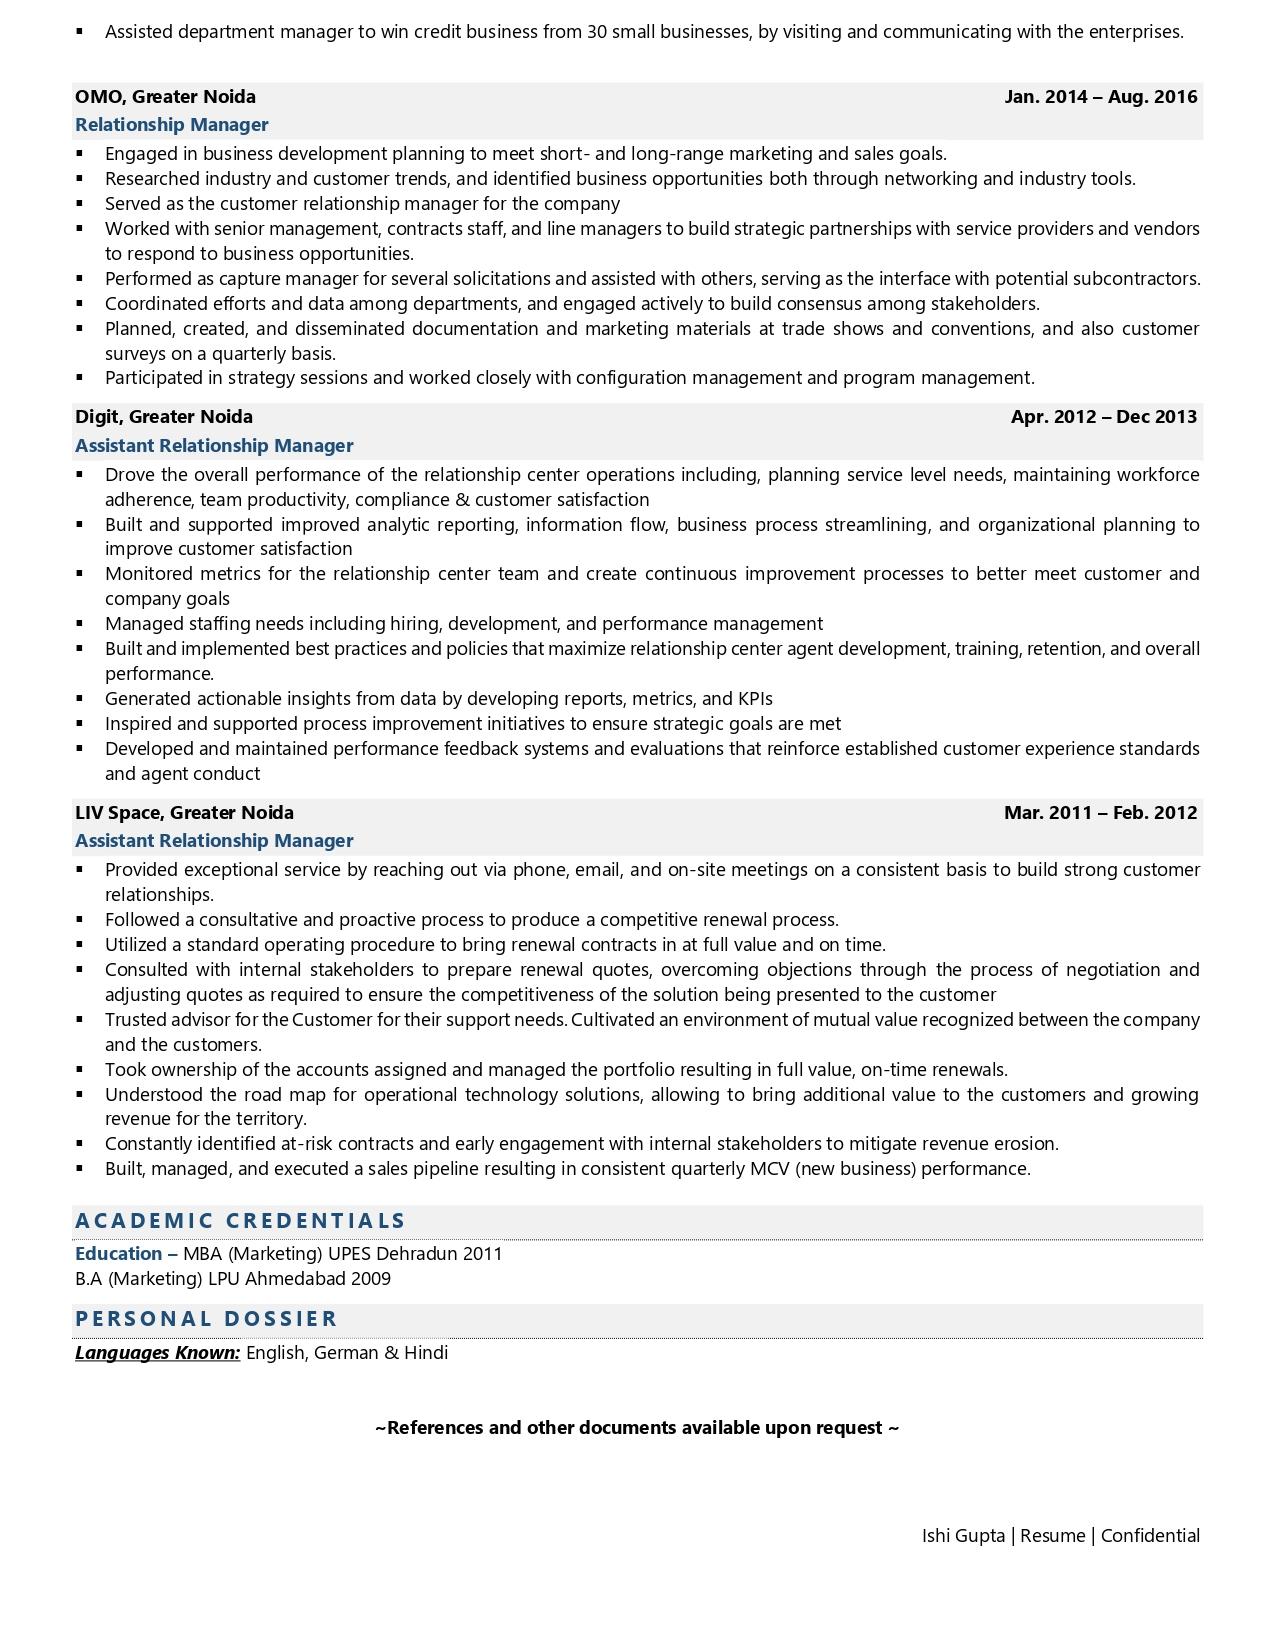 Relationship Manager - Resume Example & Template